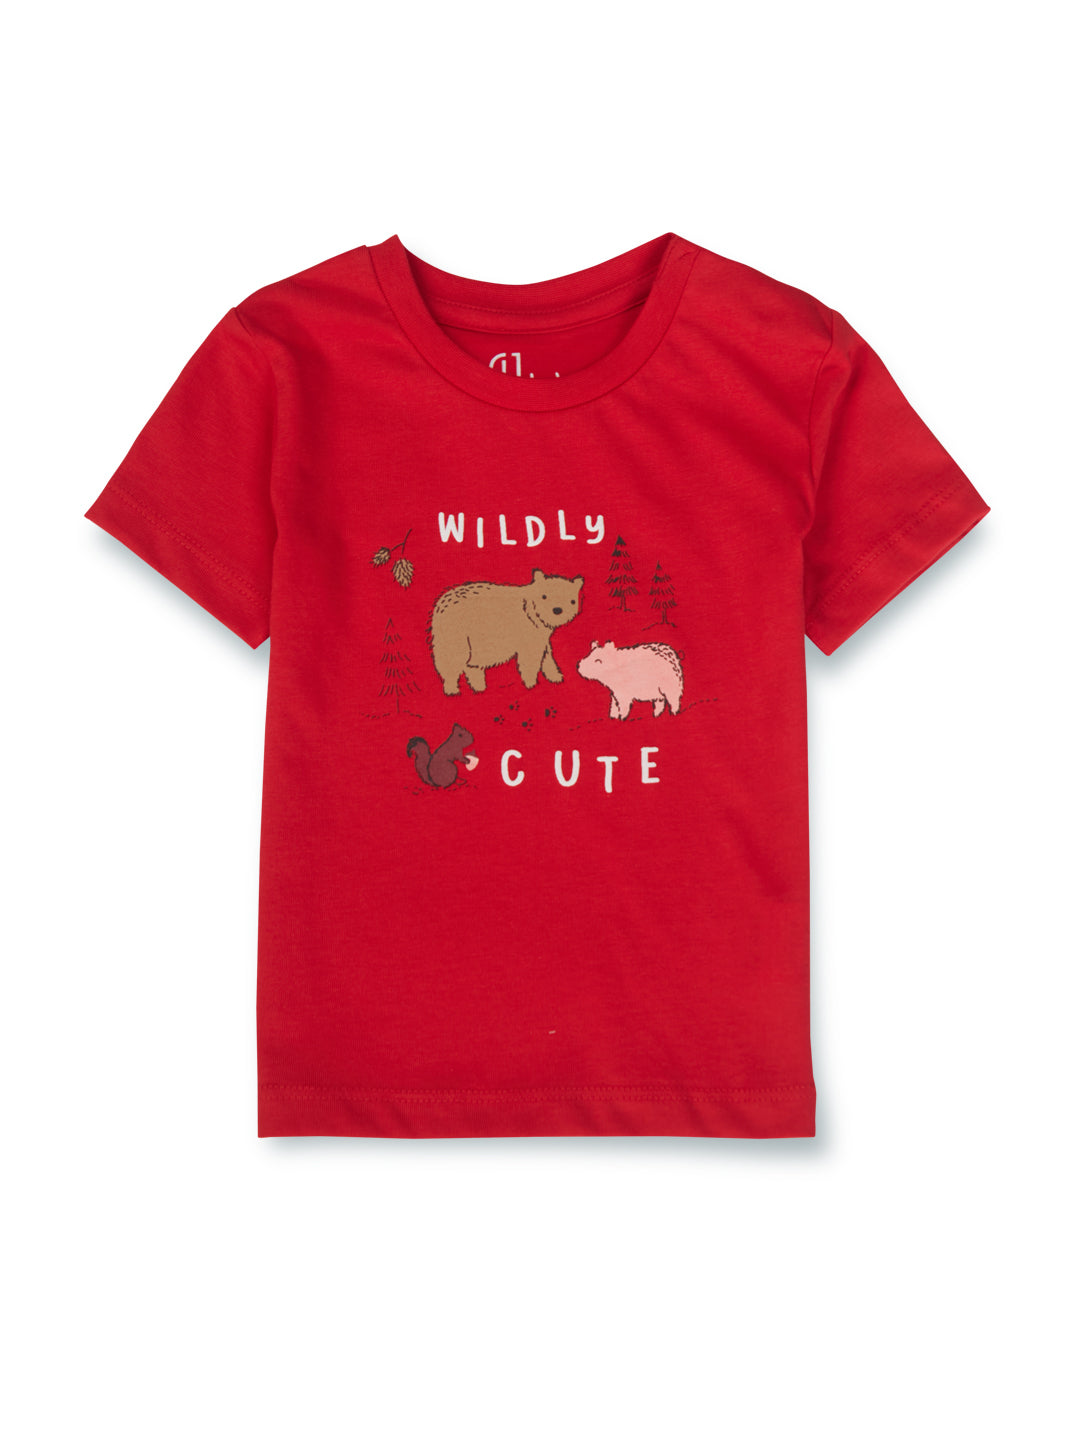 Baby Boys Red Round Neck Knitted Cotton Printed T-Shirt